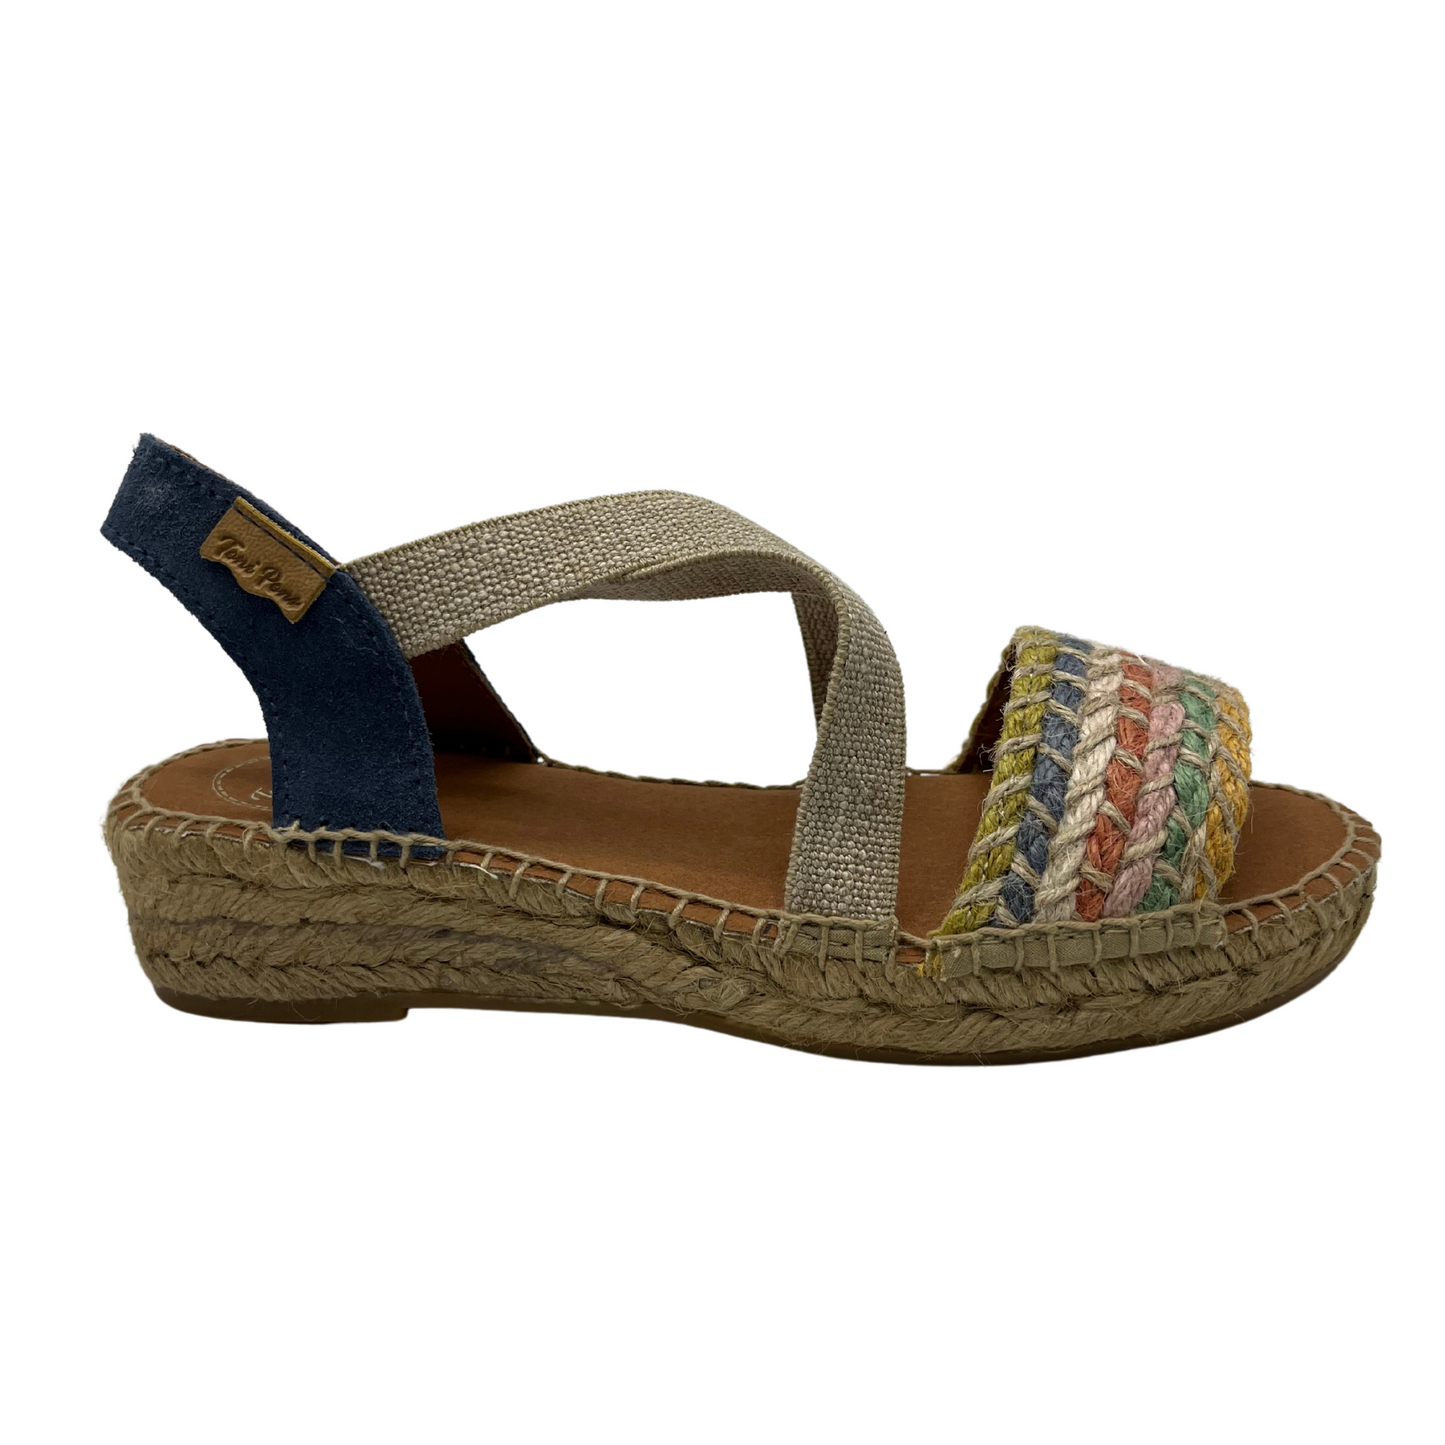 Right facing view of women's espadrille with non-slip rubber bottom and hand stitched details.